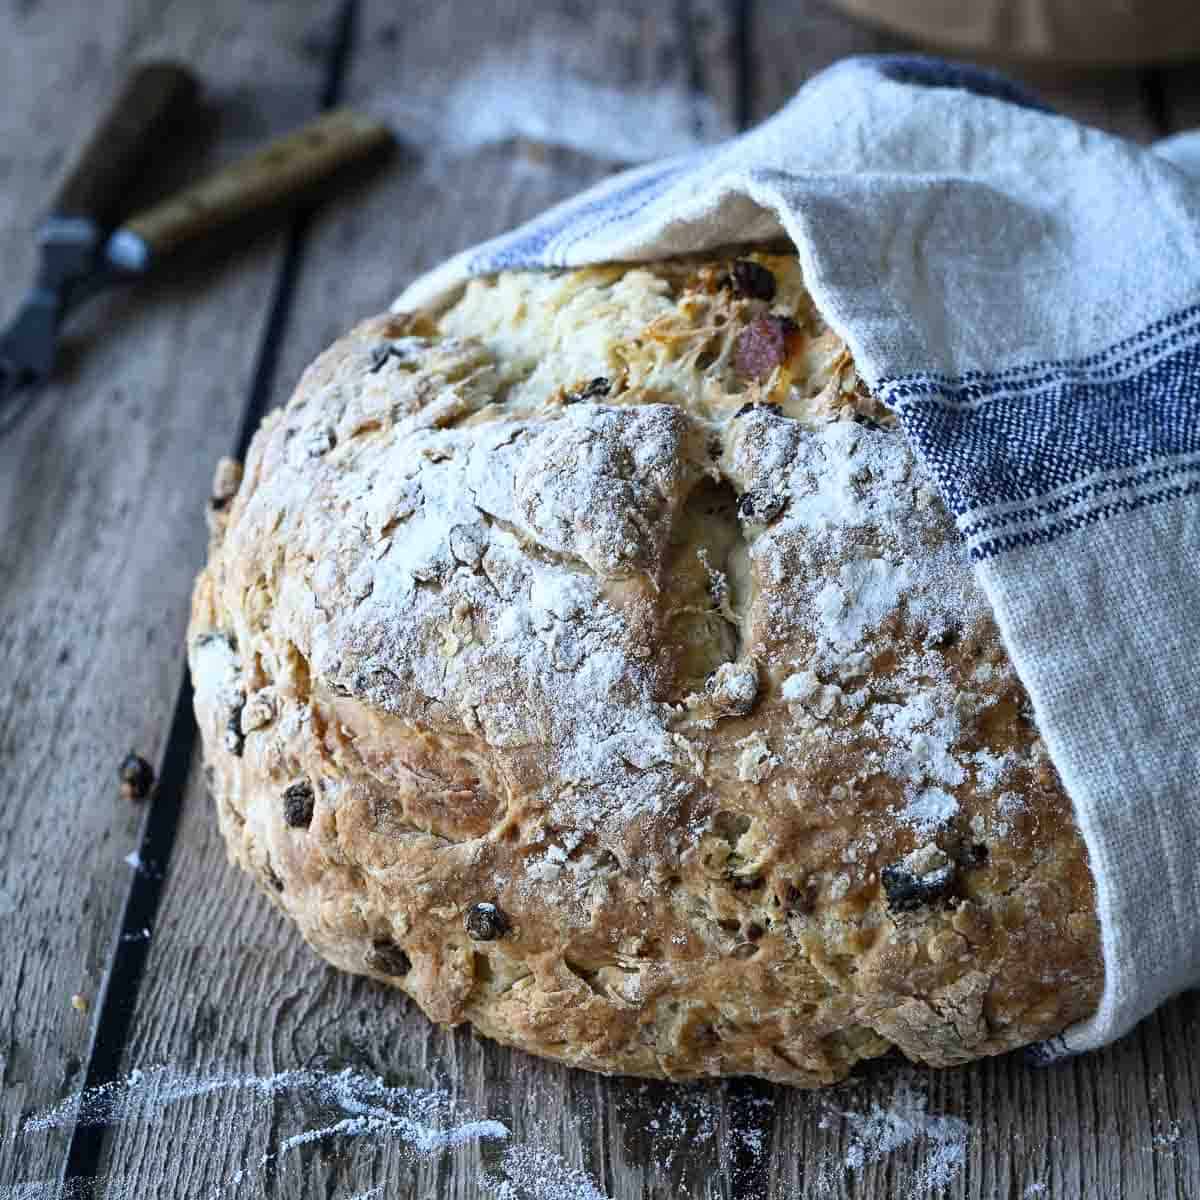 Irish soda bread wrapped in a towel on top of a wooden surface.